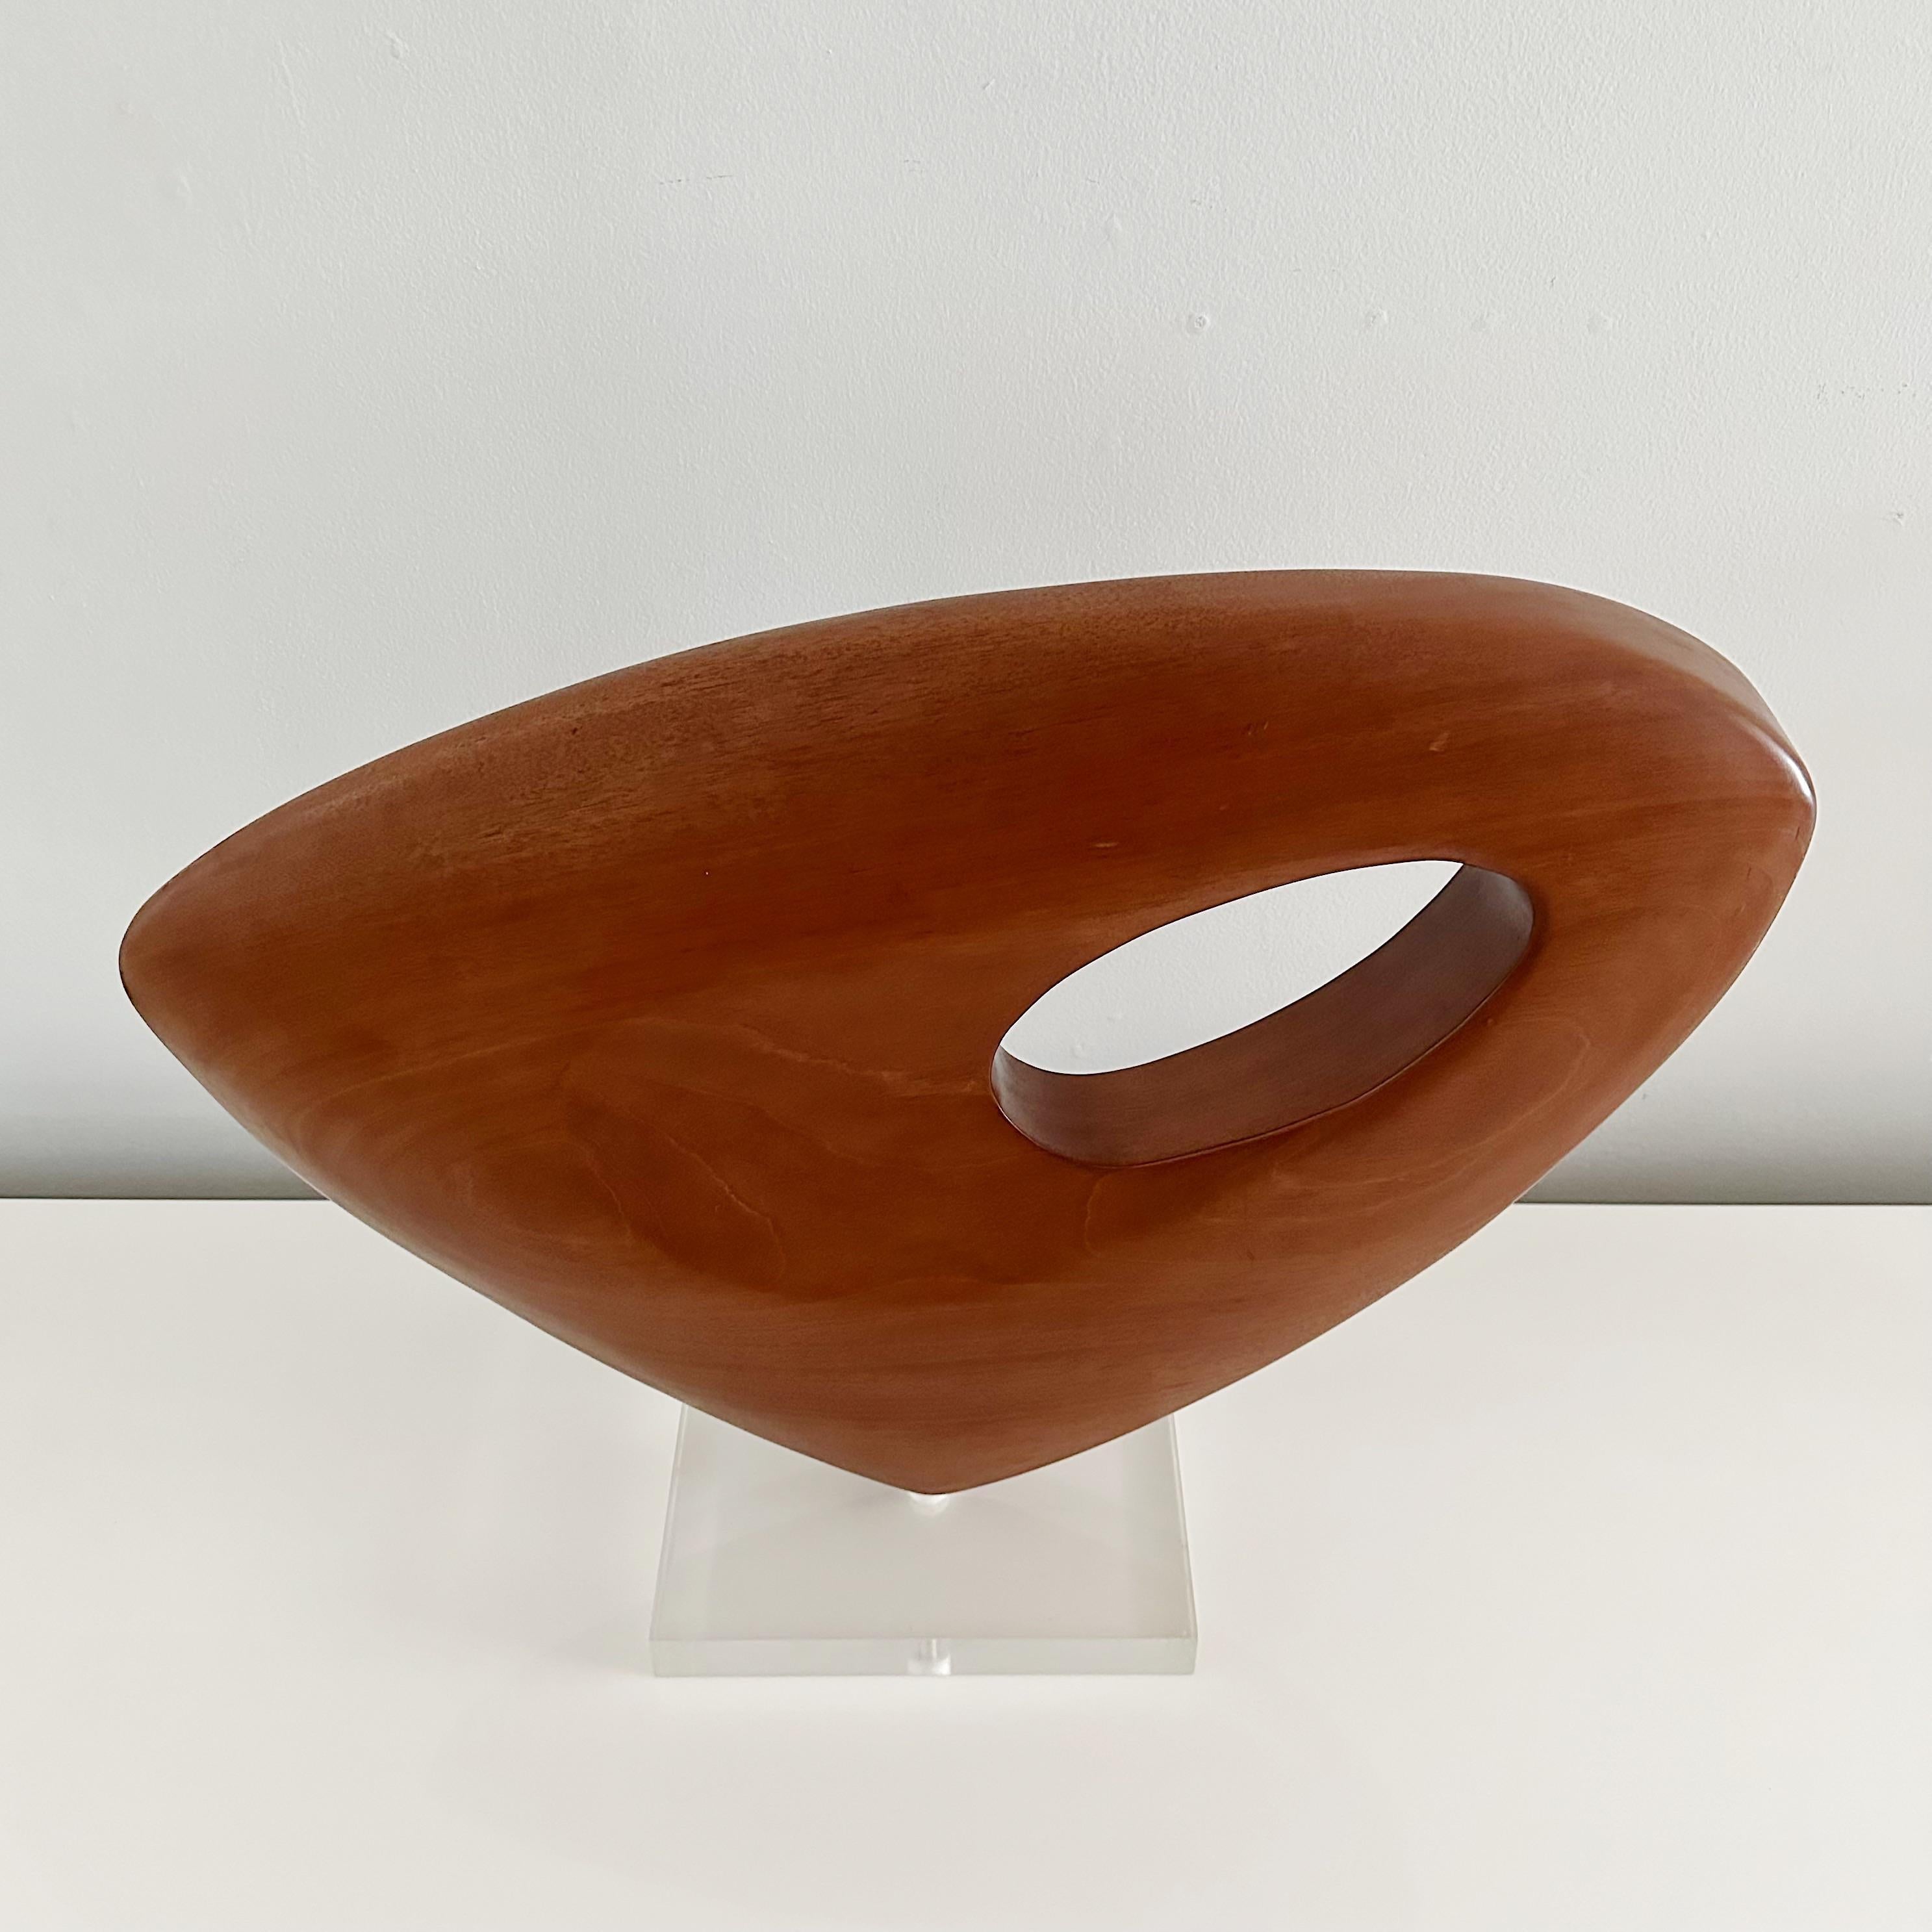 .

This biomorphic organic sculpture is hand carved from one large piece of walnut wood. Showcasing an interesting exploration of negative space, the piece features an oval cutout near the top corner. This stately yet modern design is mounted on a